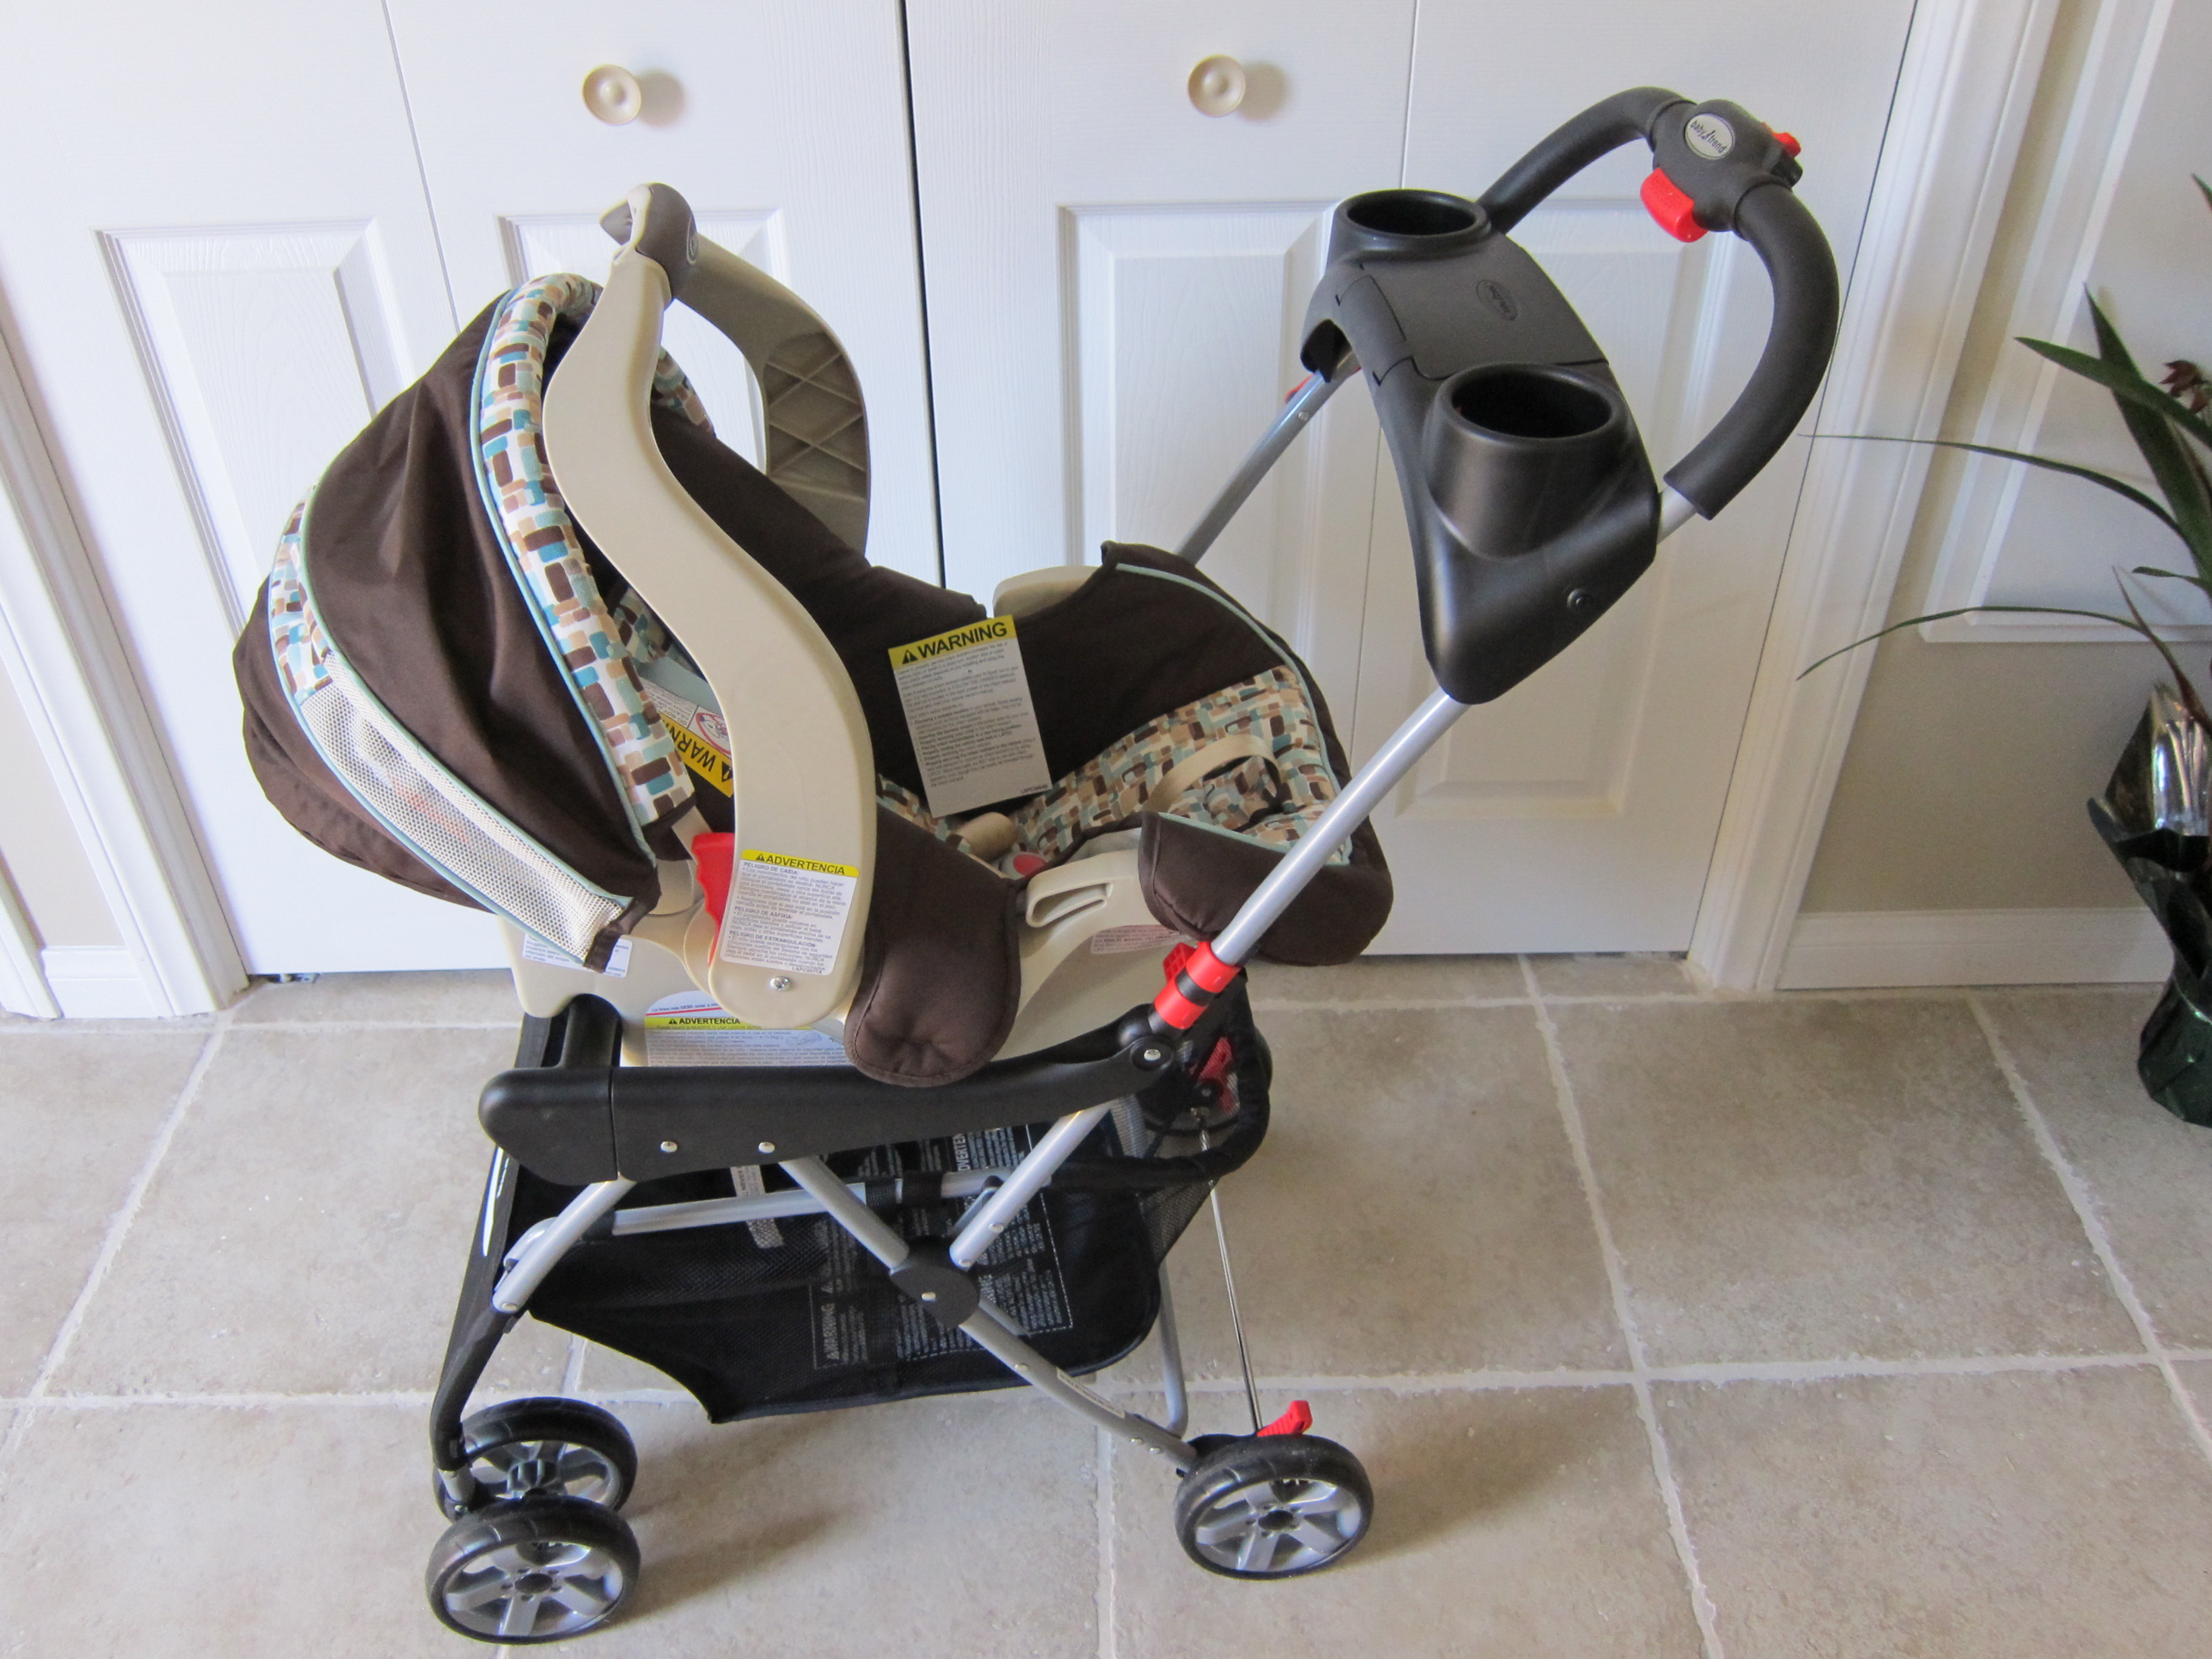 graco snugride 30 stroller and carseat